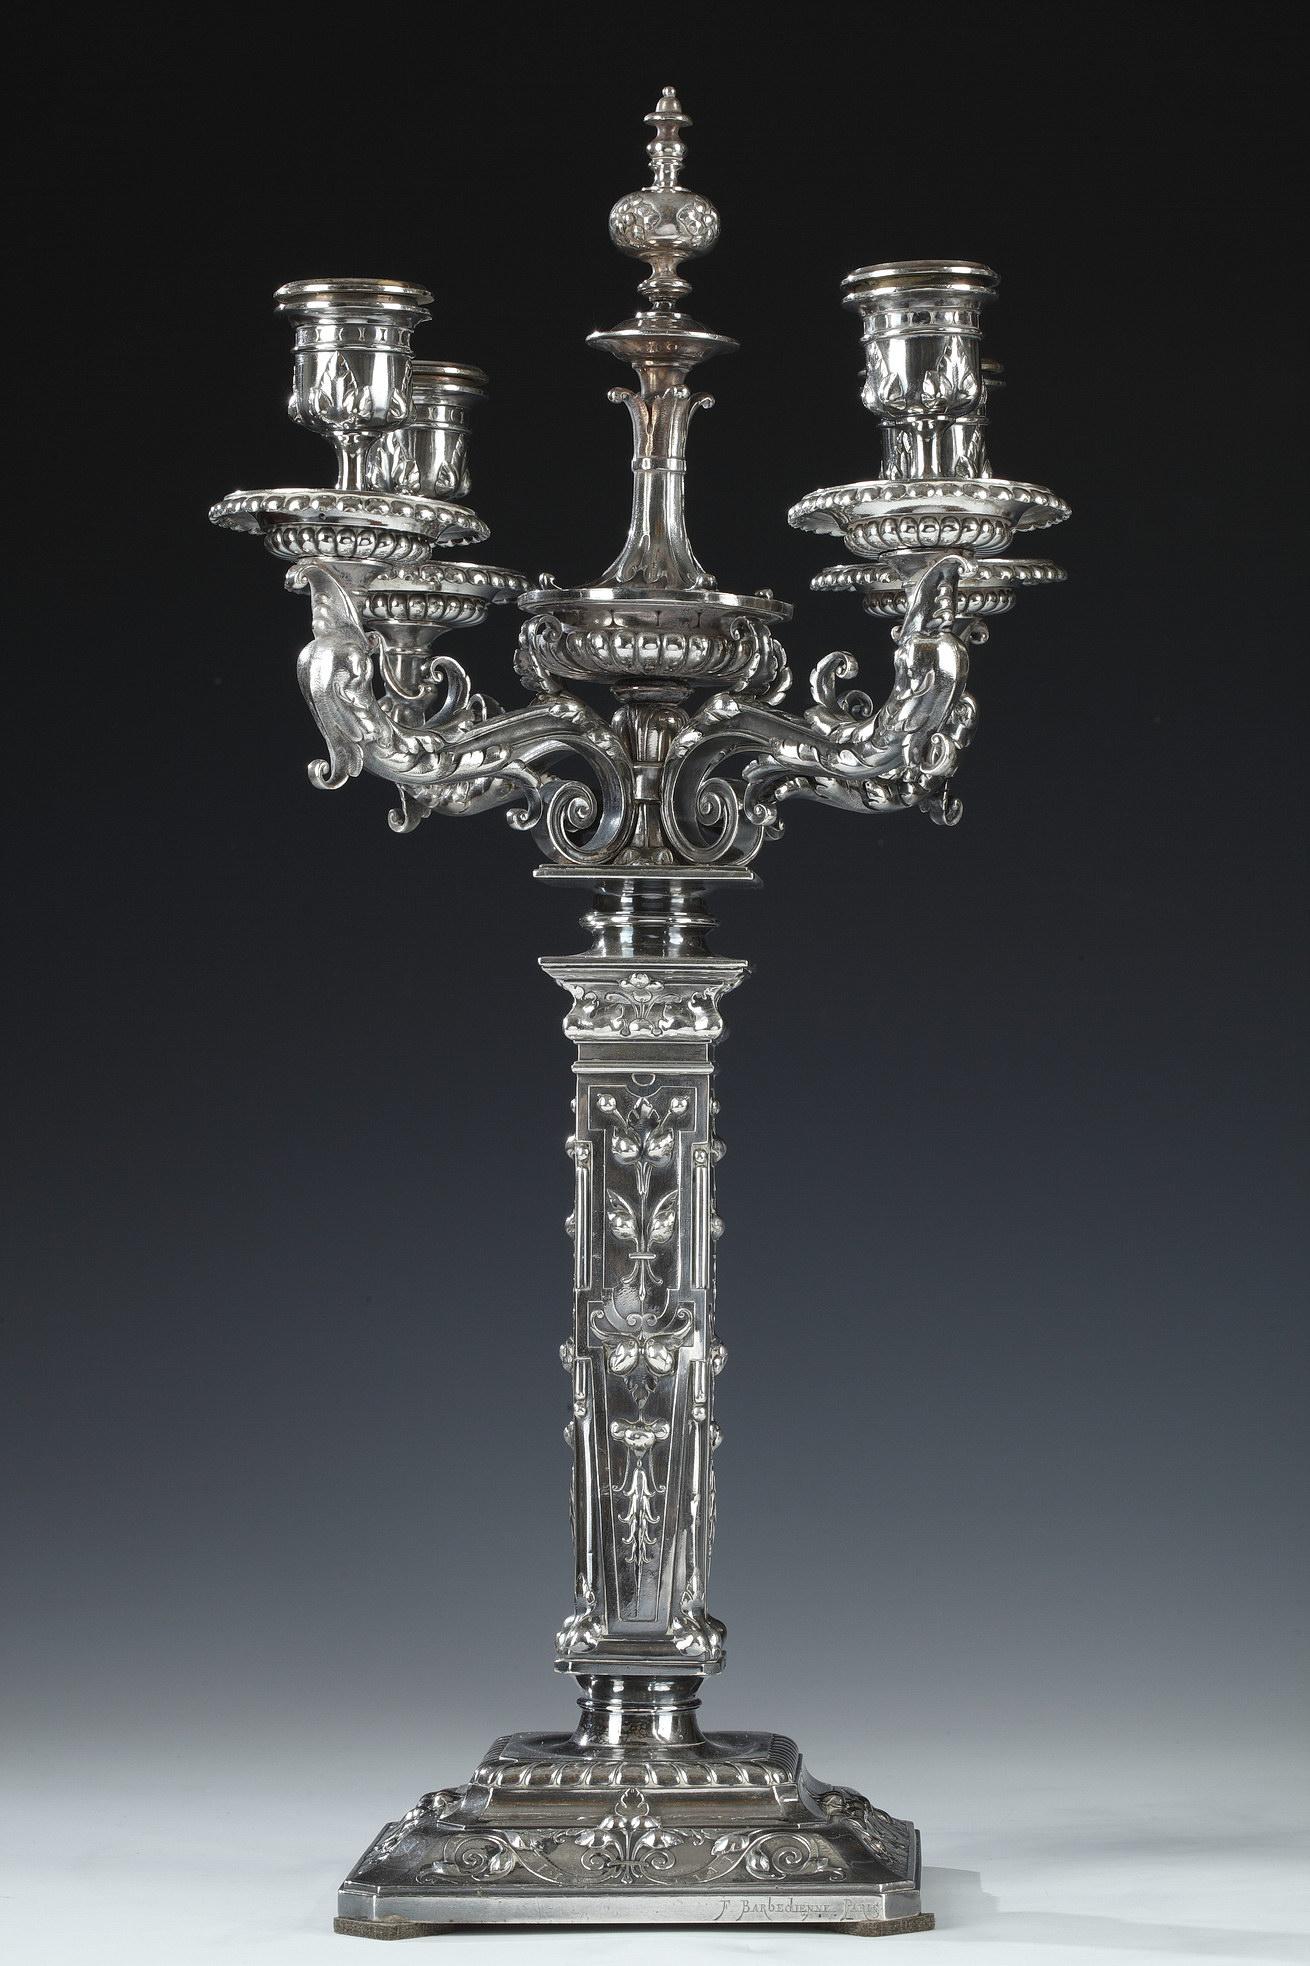 French Pair of Candelabras by F. Barbedienne, L-C. Sevin and D. Attarge, France, 1869